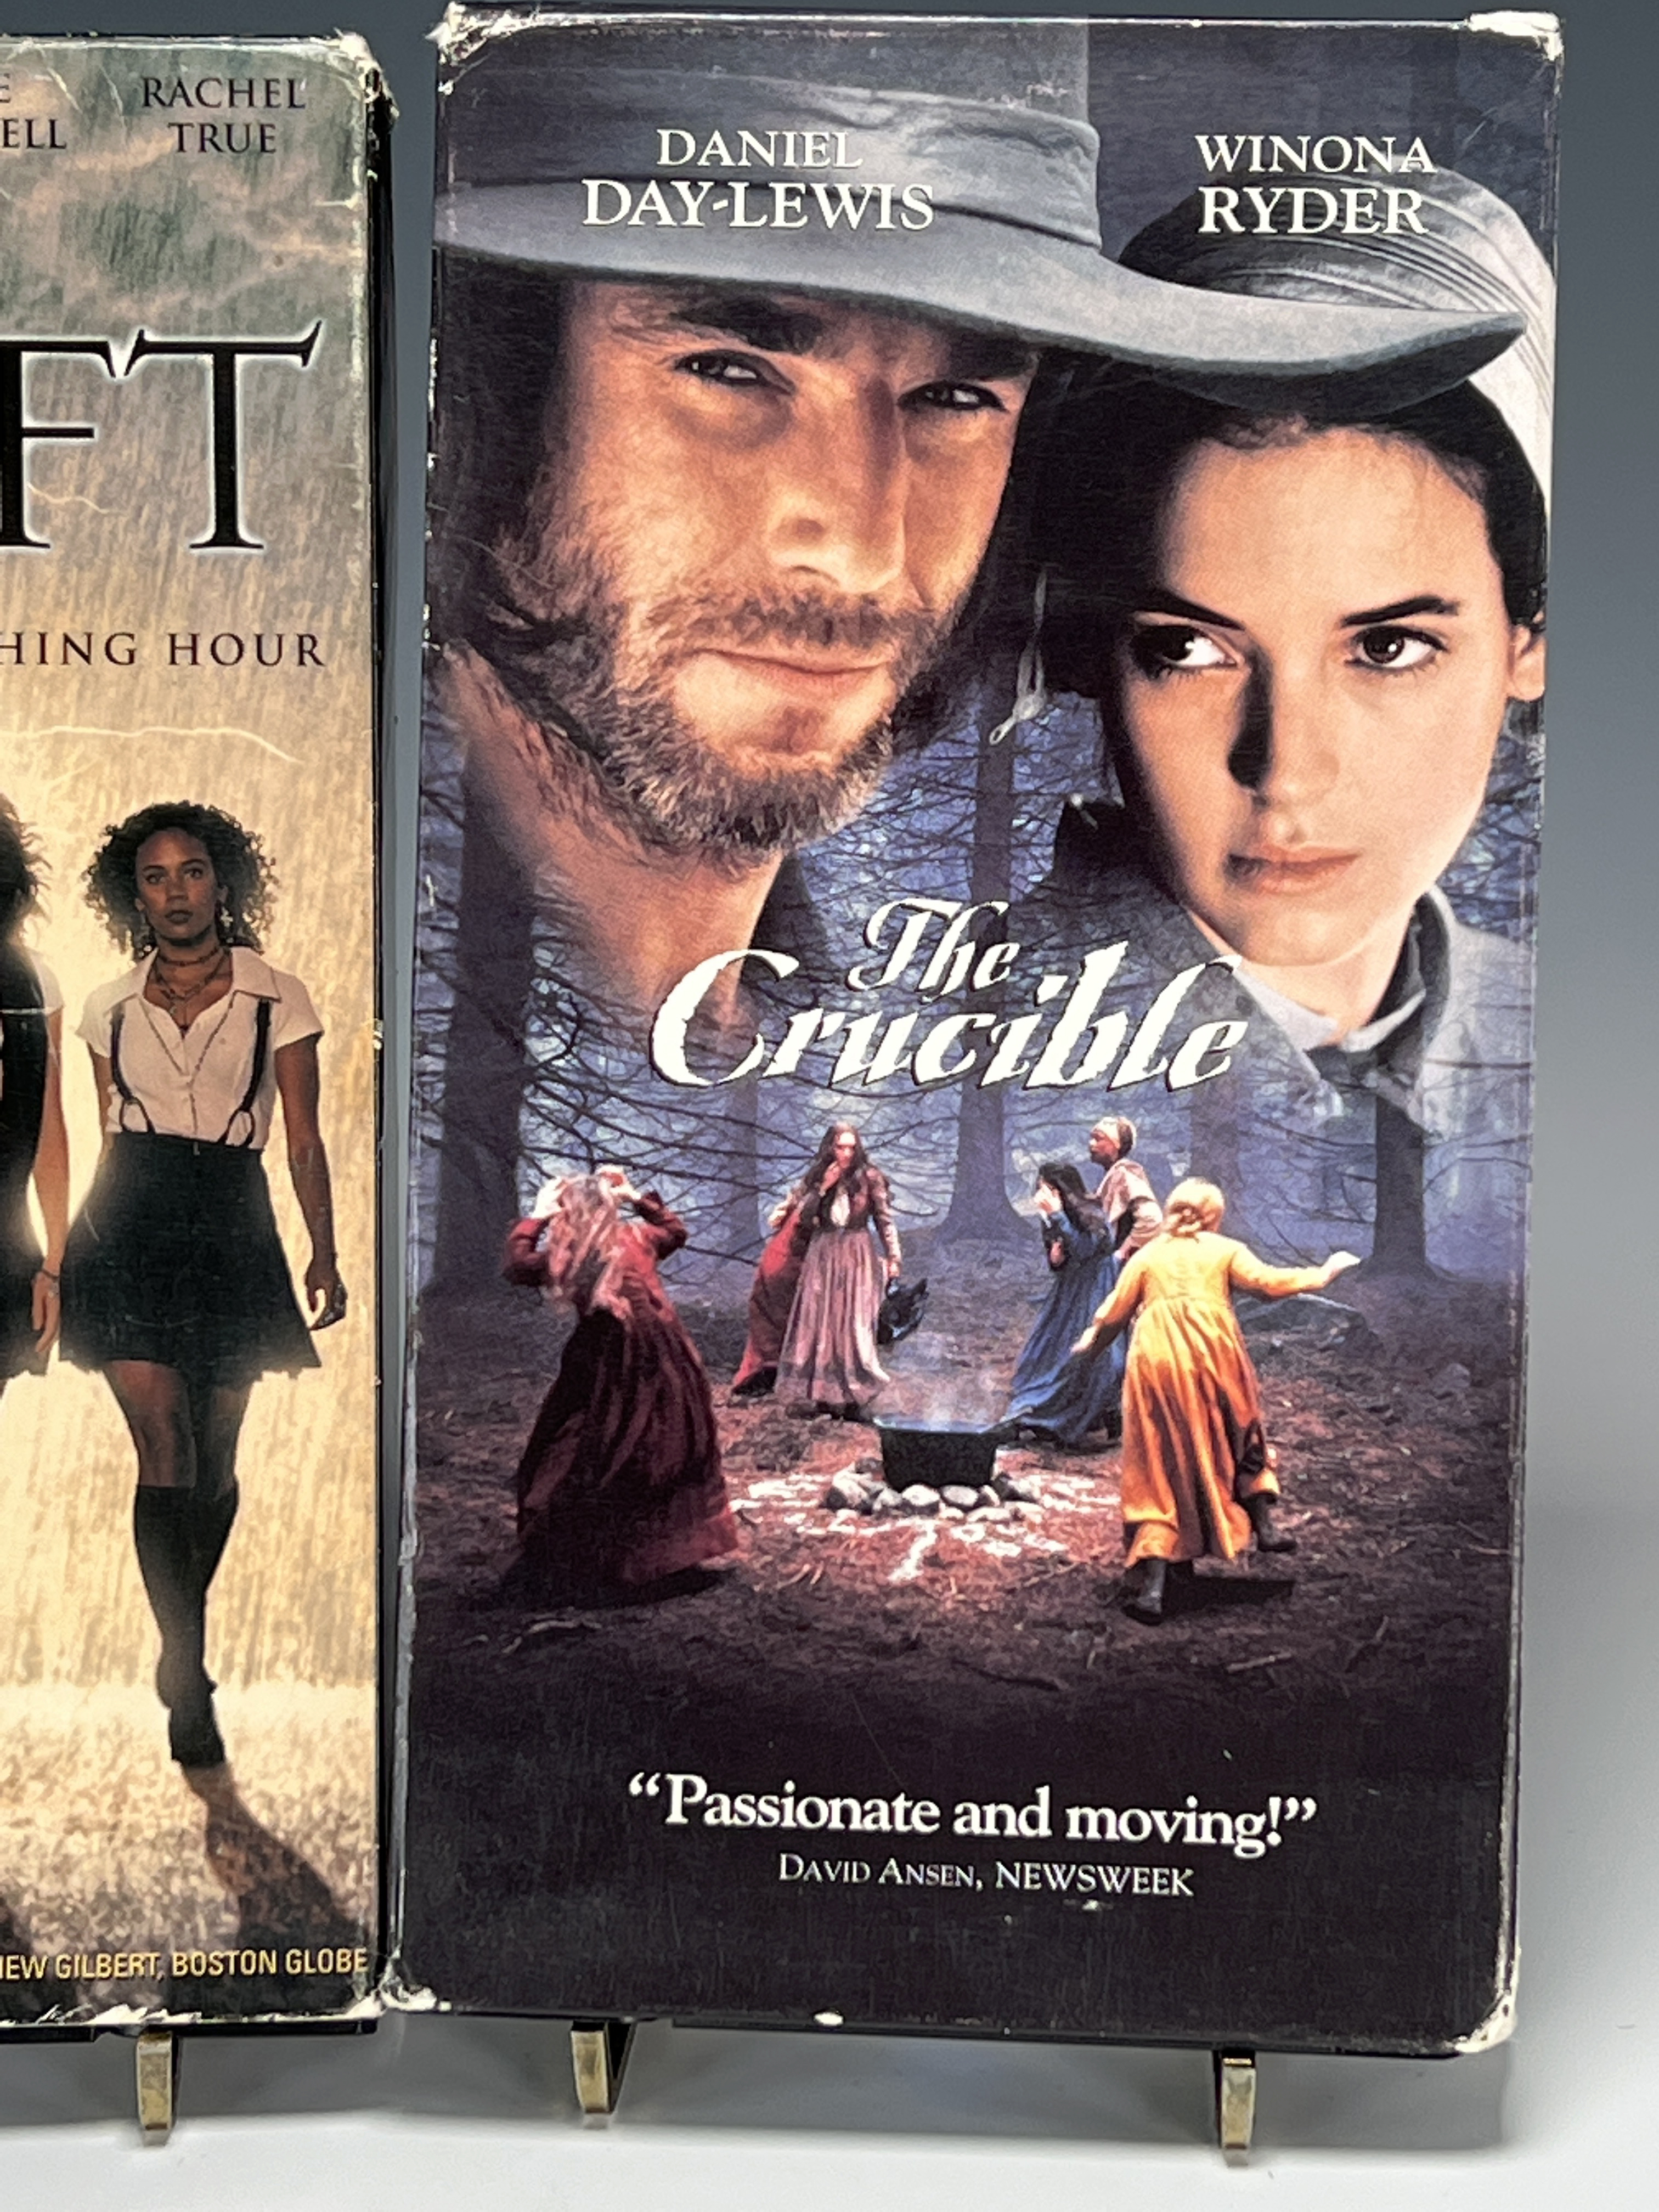 The Craft & The Crucible Vhs Daniel Day-Lewis image 3